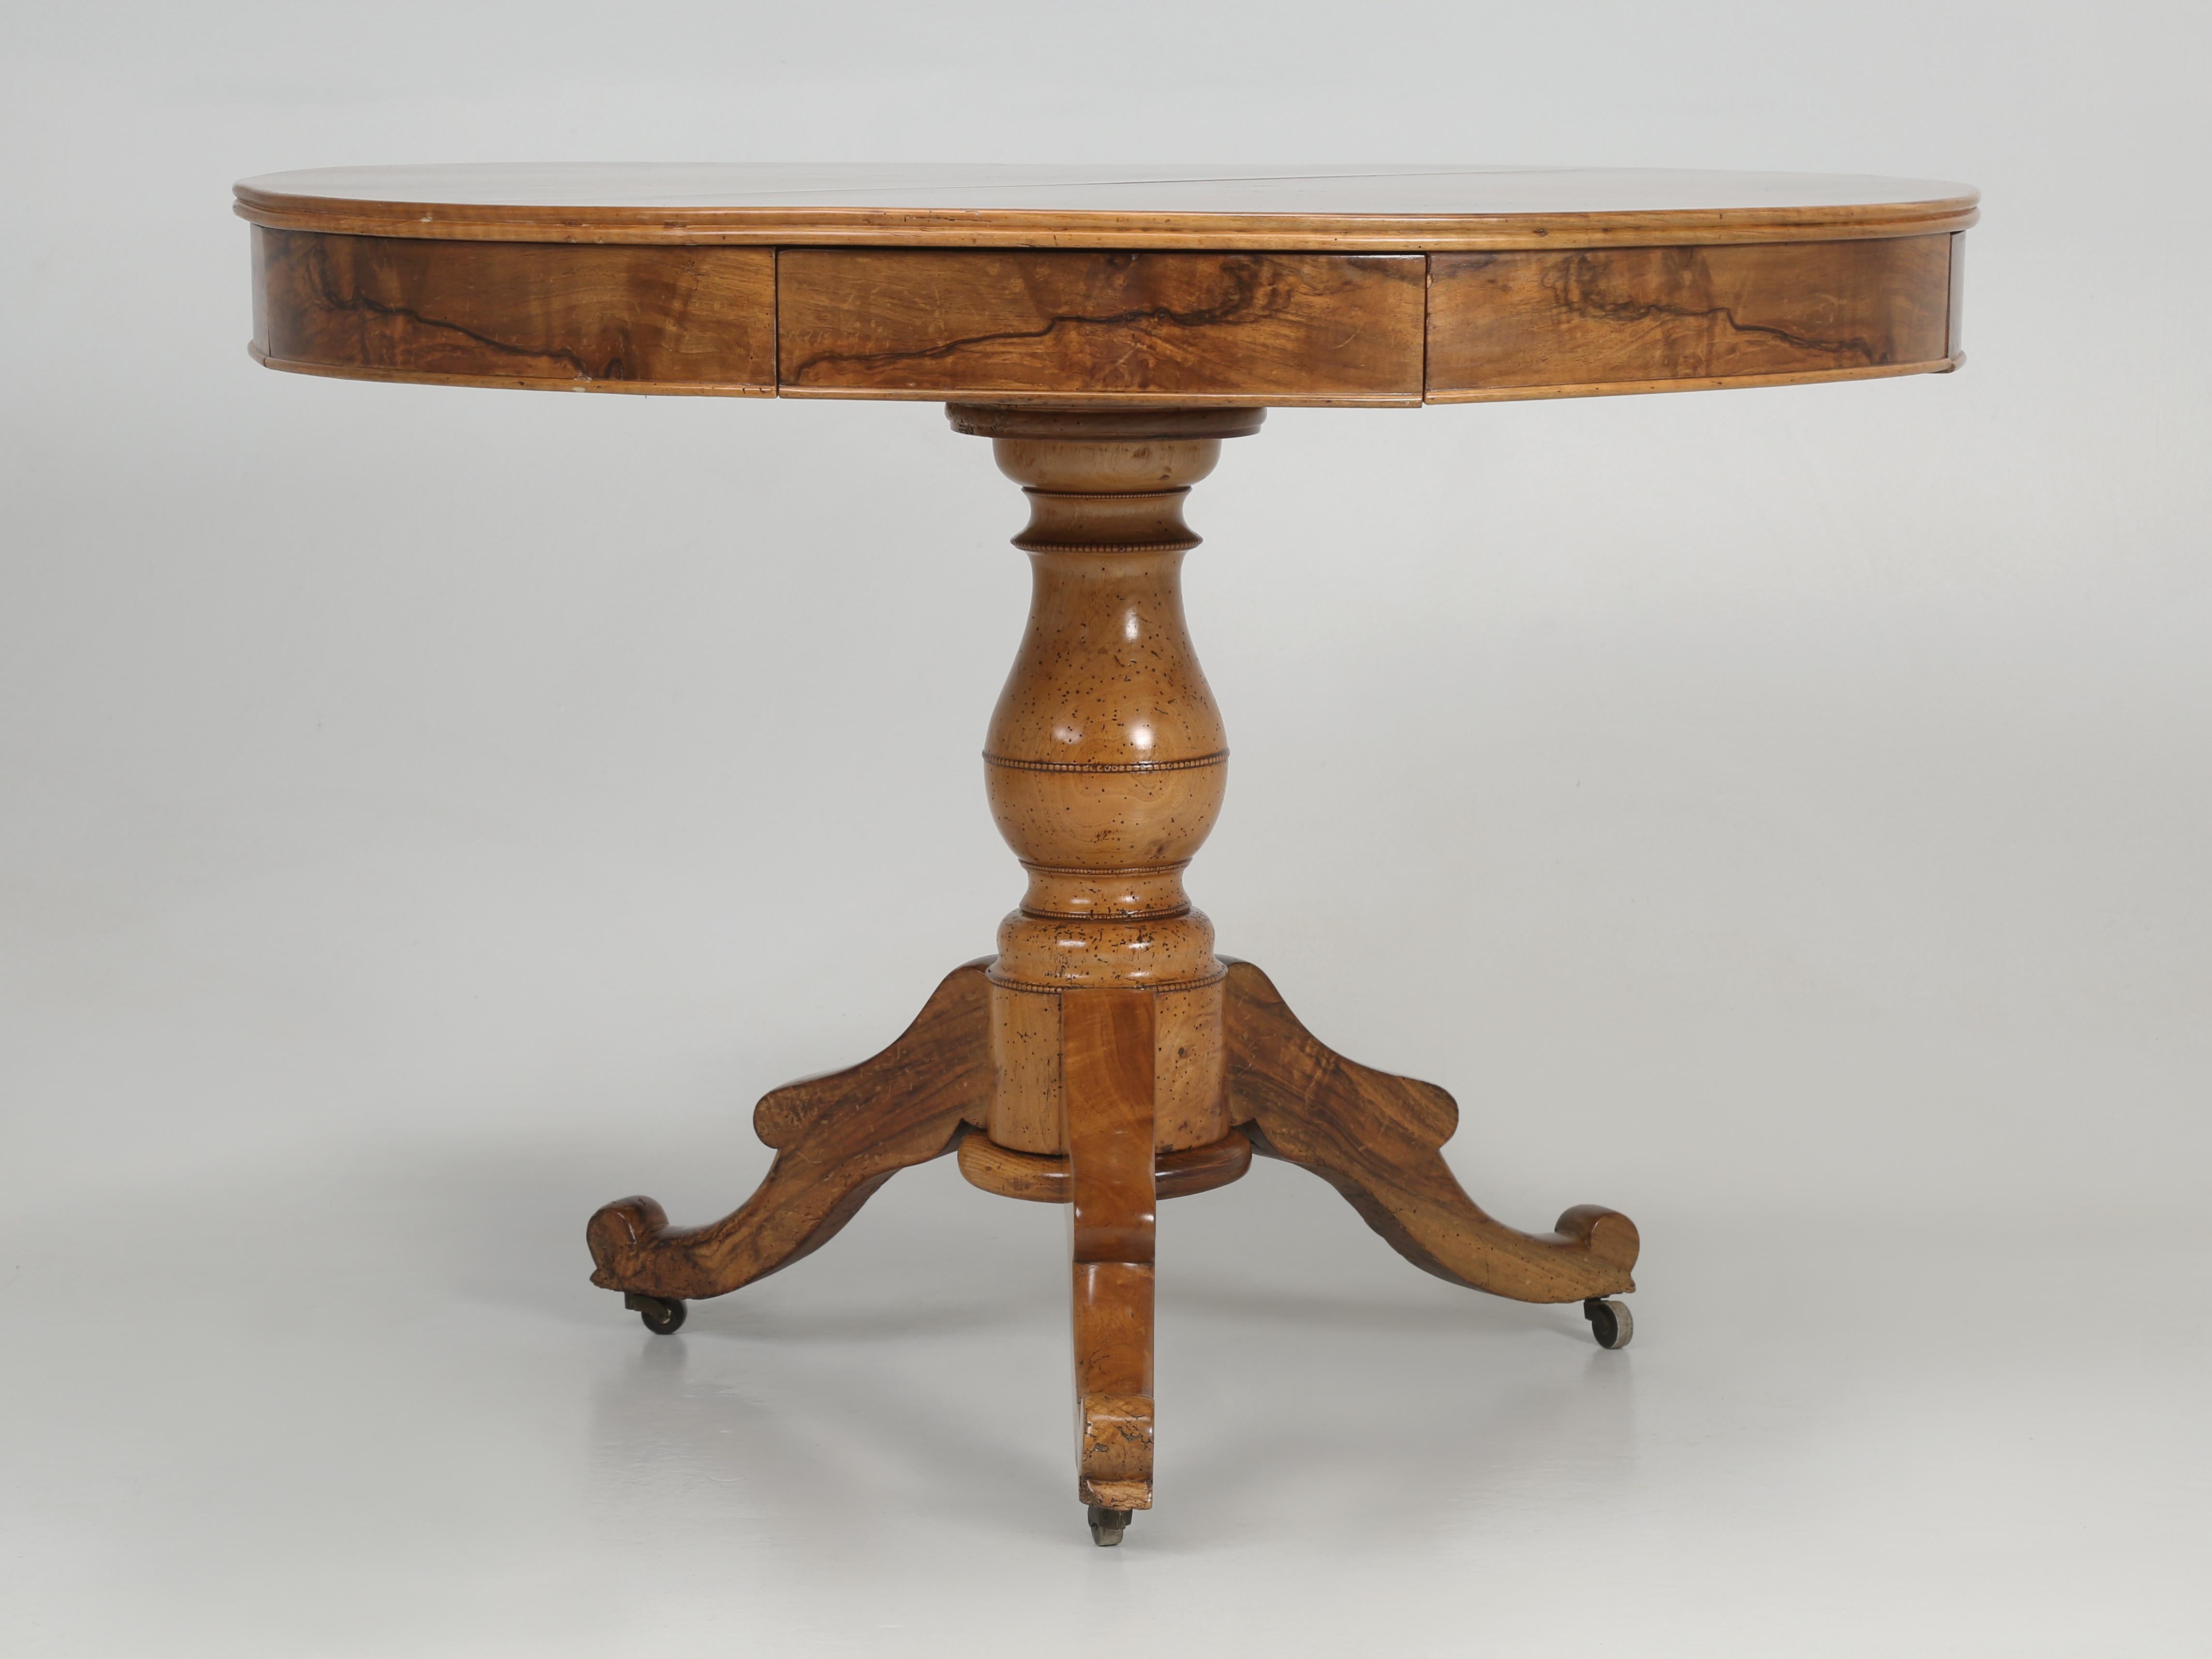 Antique French Center Hall Table in Crotch Walnut with French Polish Finish For Sale 3